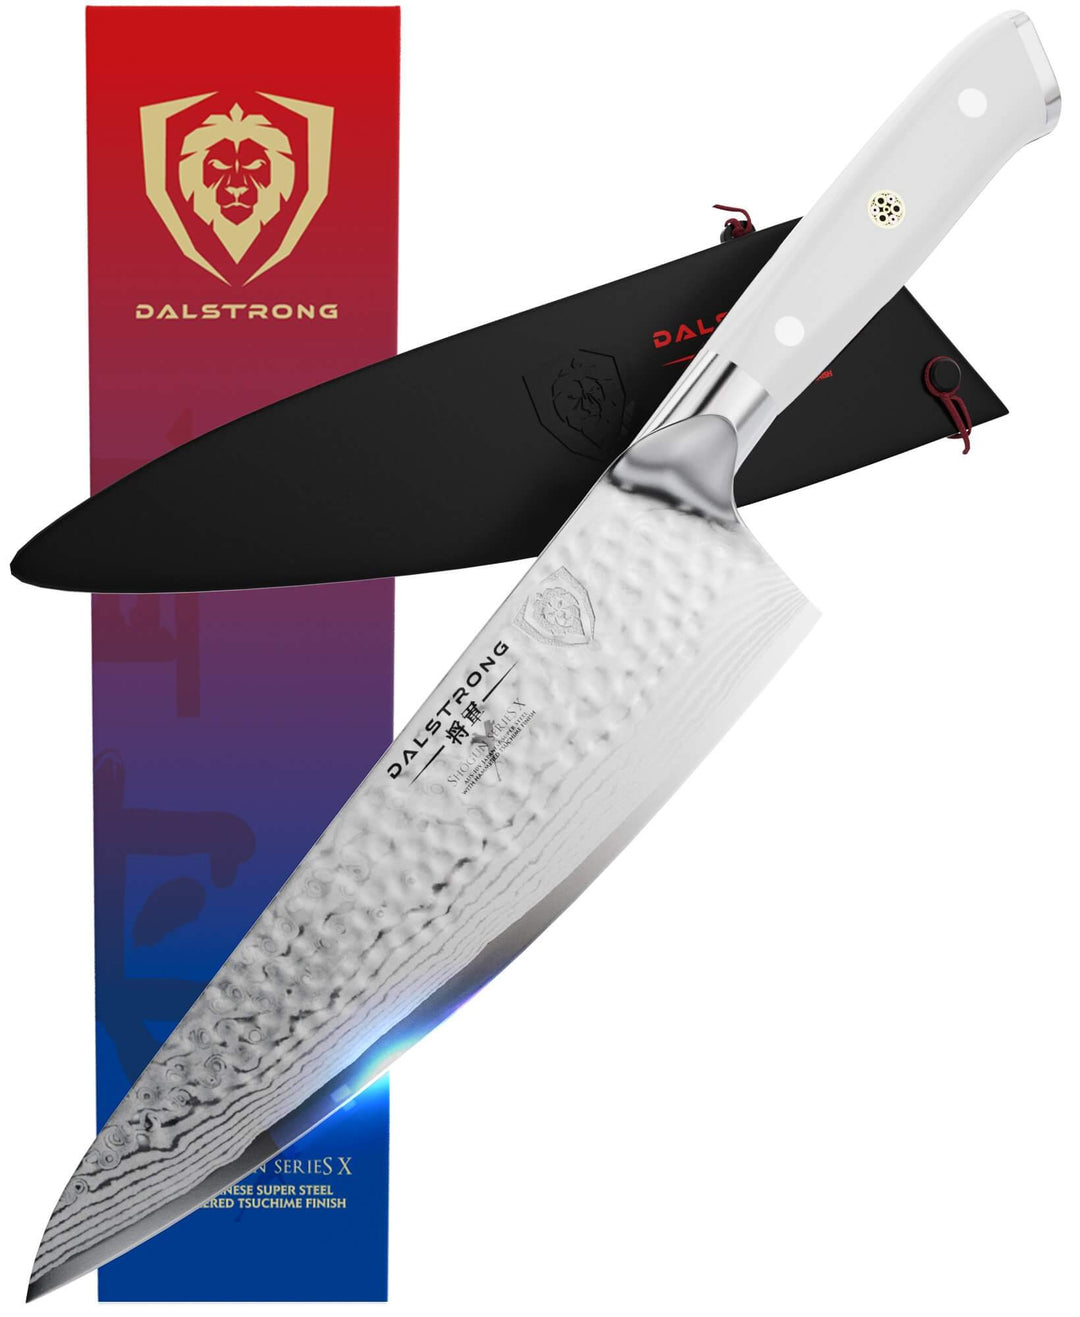 Dalstrong shogun series 8 inch chef knife with white handle in front of it's premium packaging.